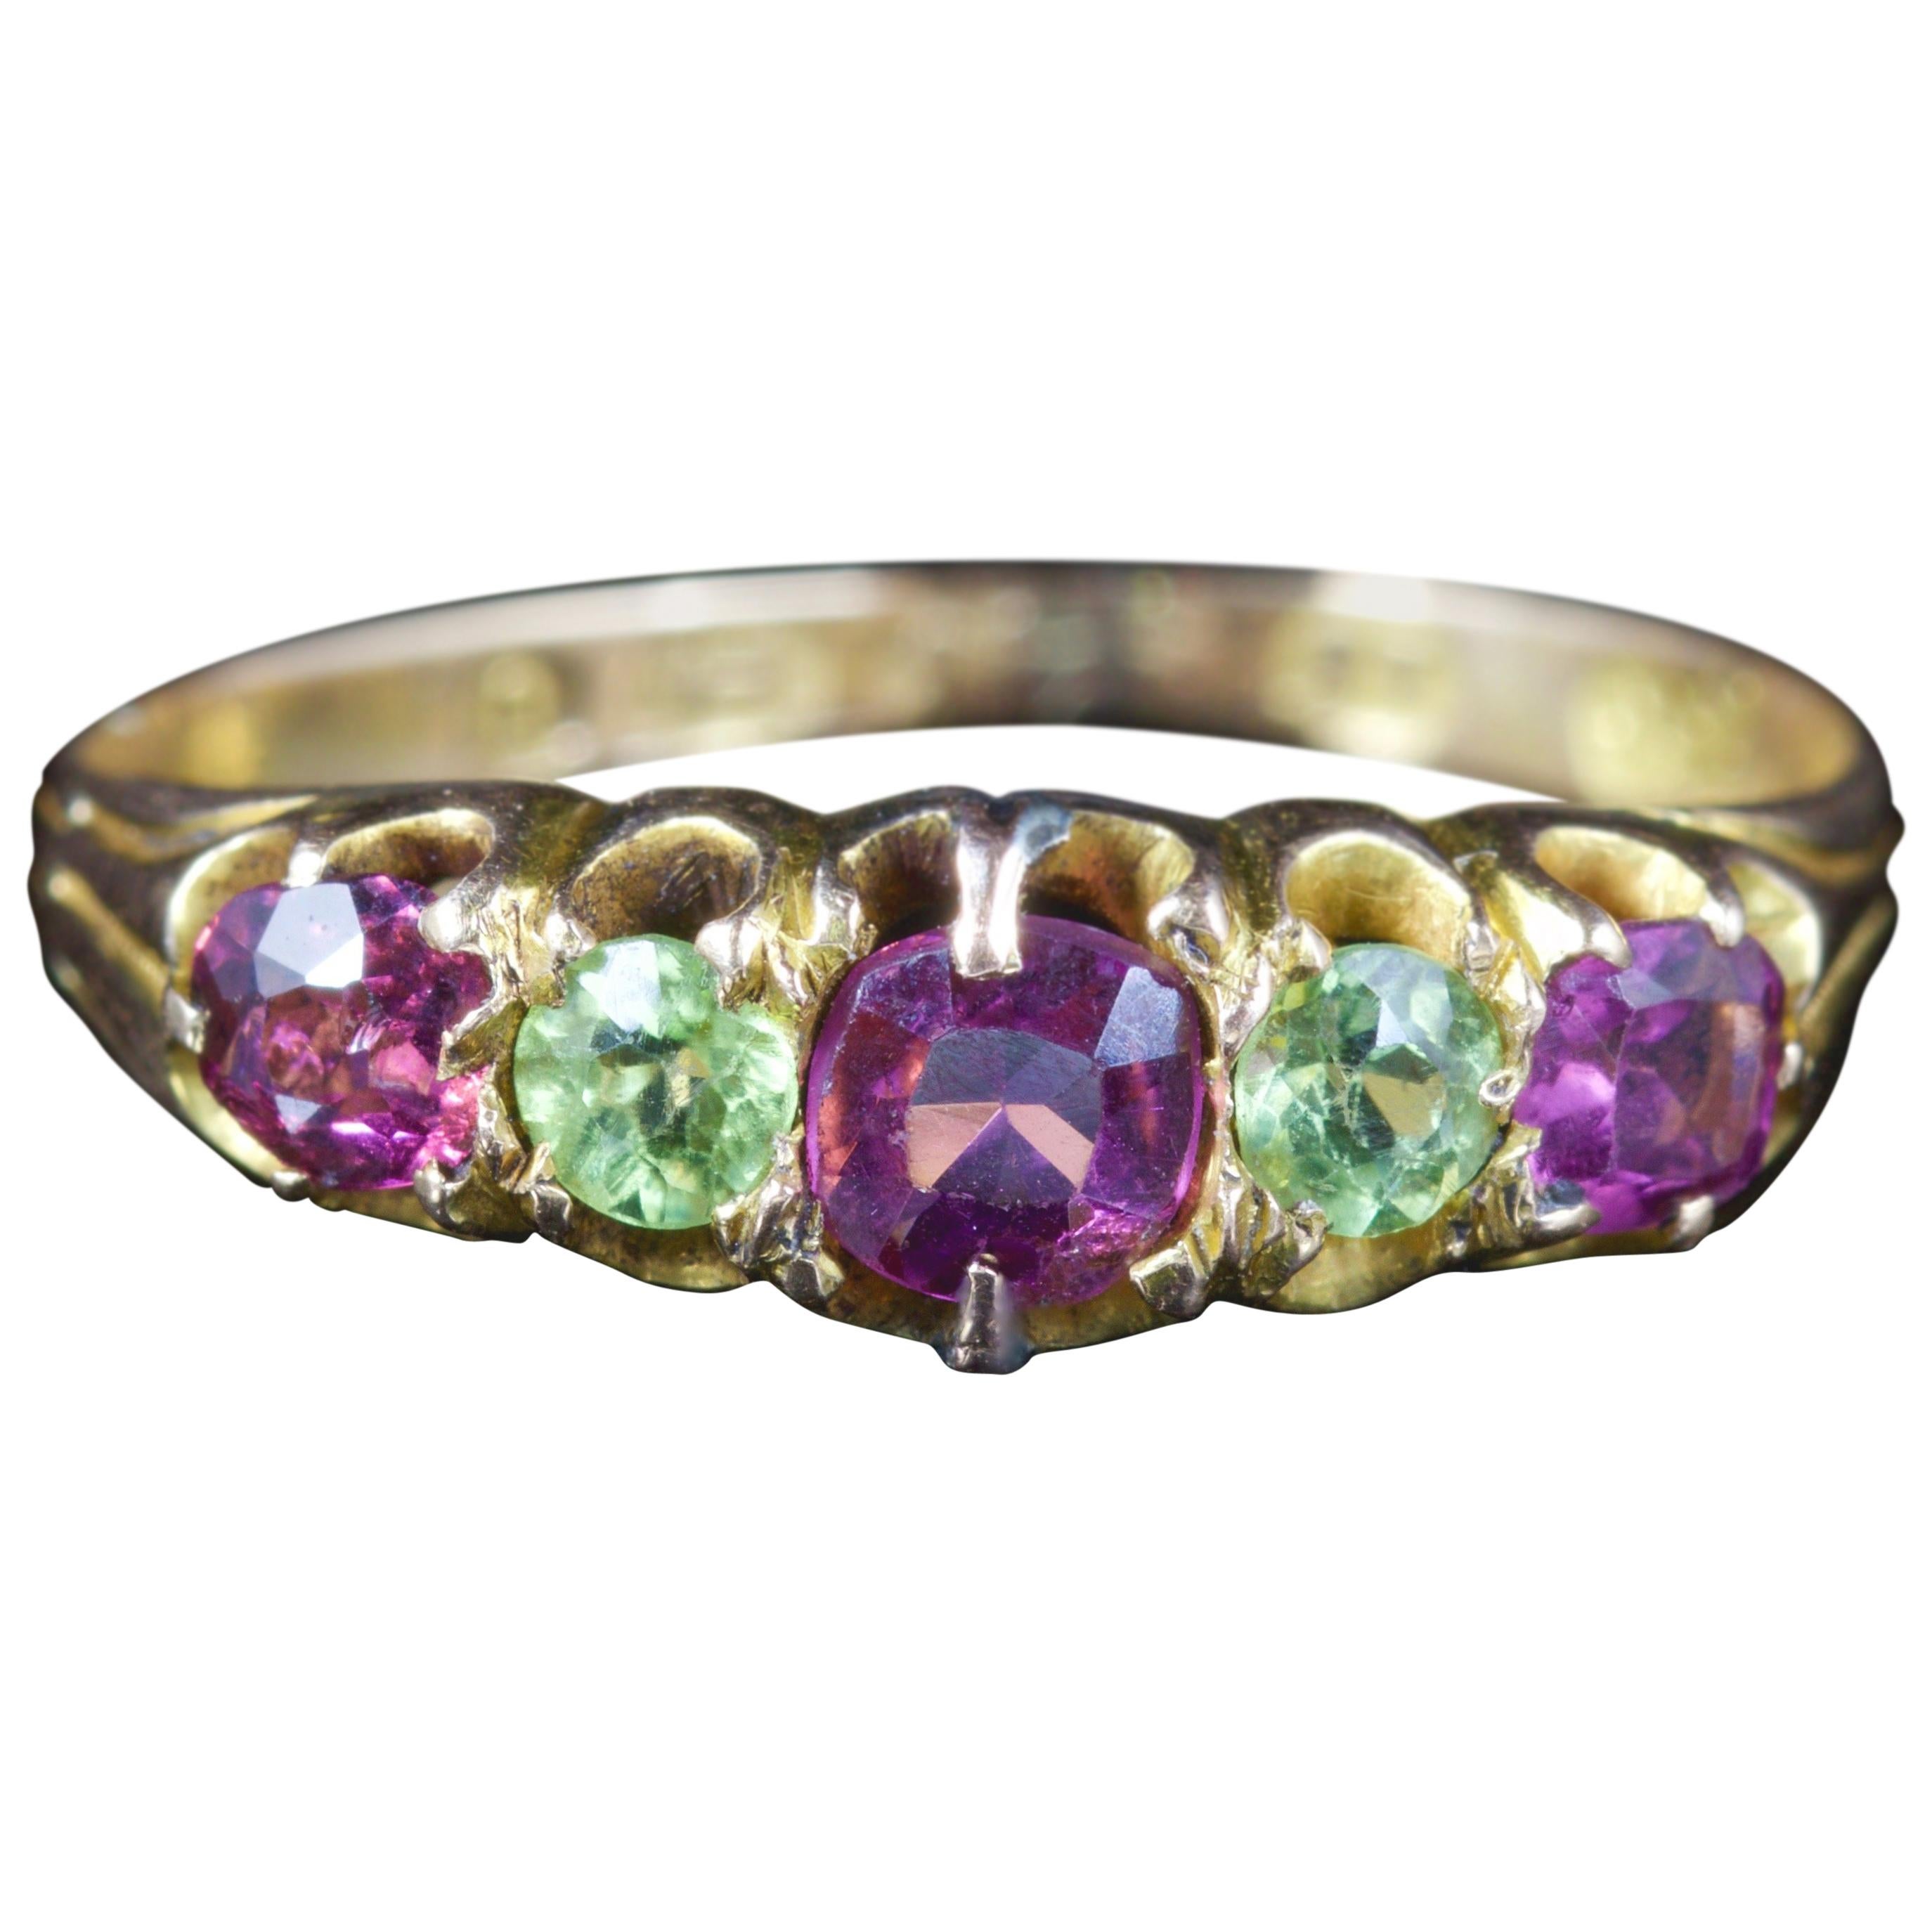 Antique Victorian Suffragette Amethyst Peridot Ring 15 Carat Gold, circa 1900 For Sale